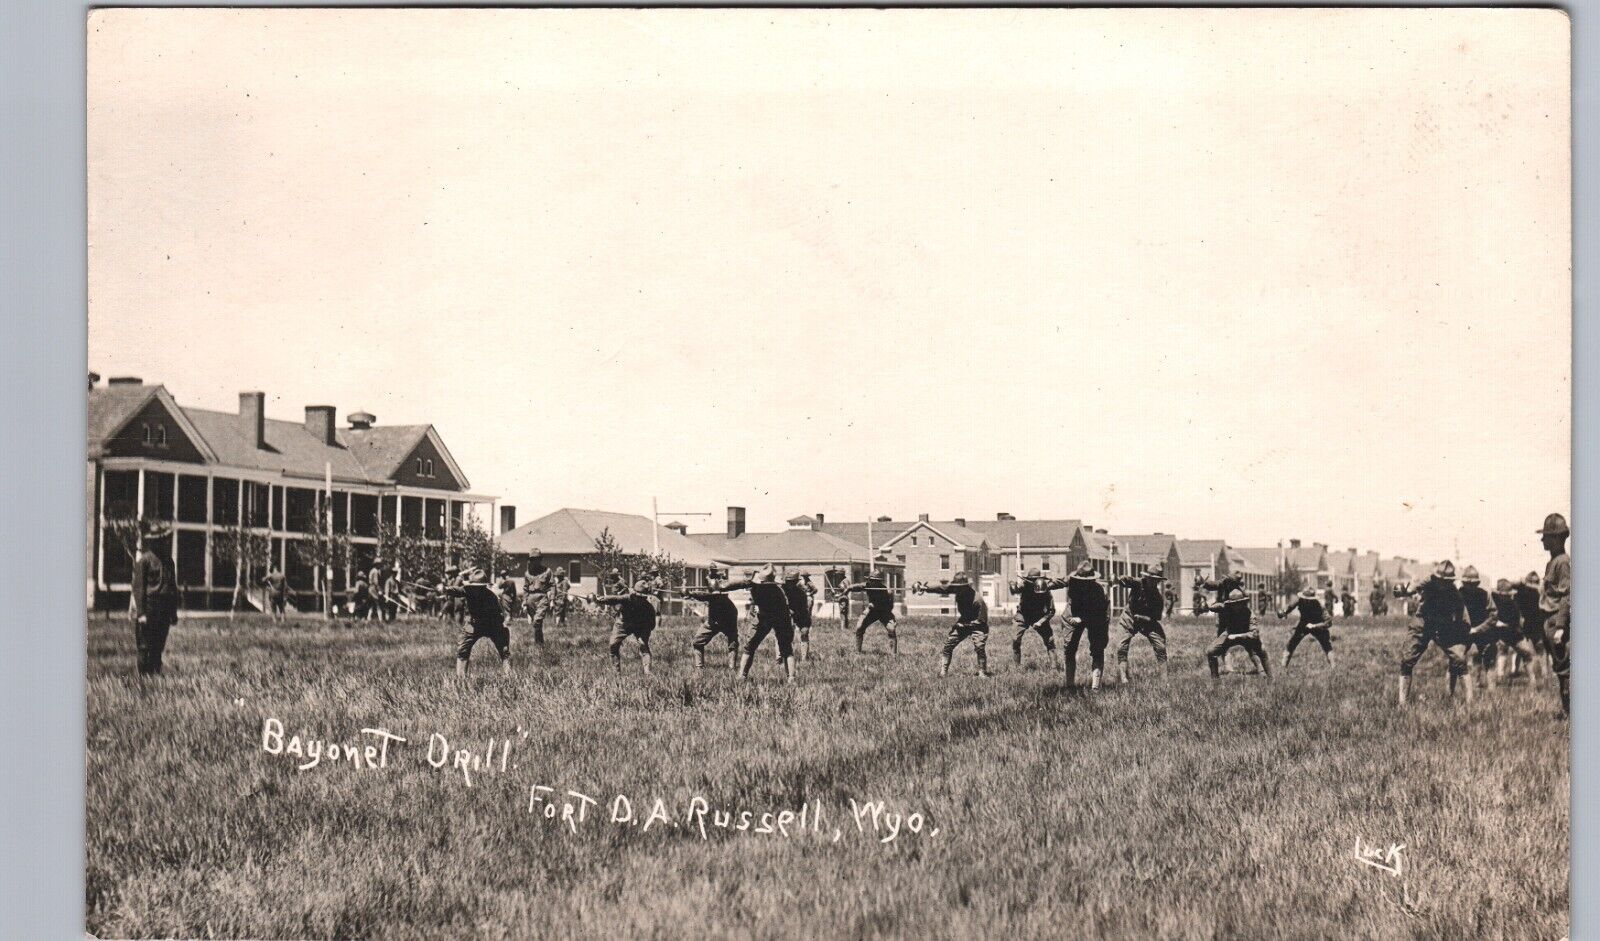 BAYONET DRILL fort d.a. russell wy real photo postcard rppc wyoming soldiers war